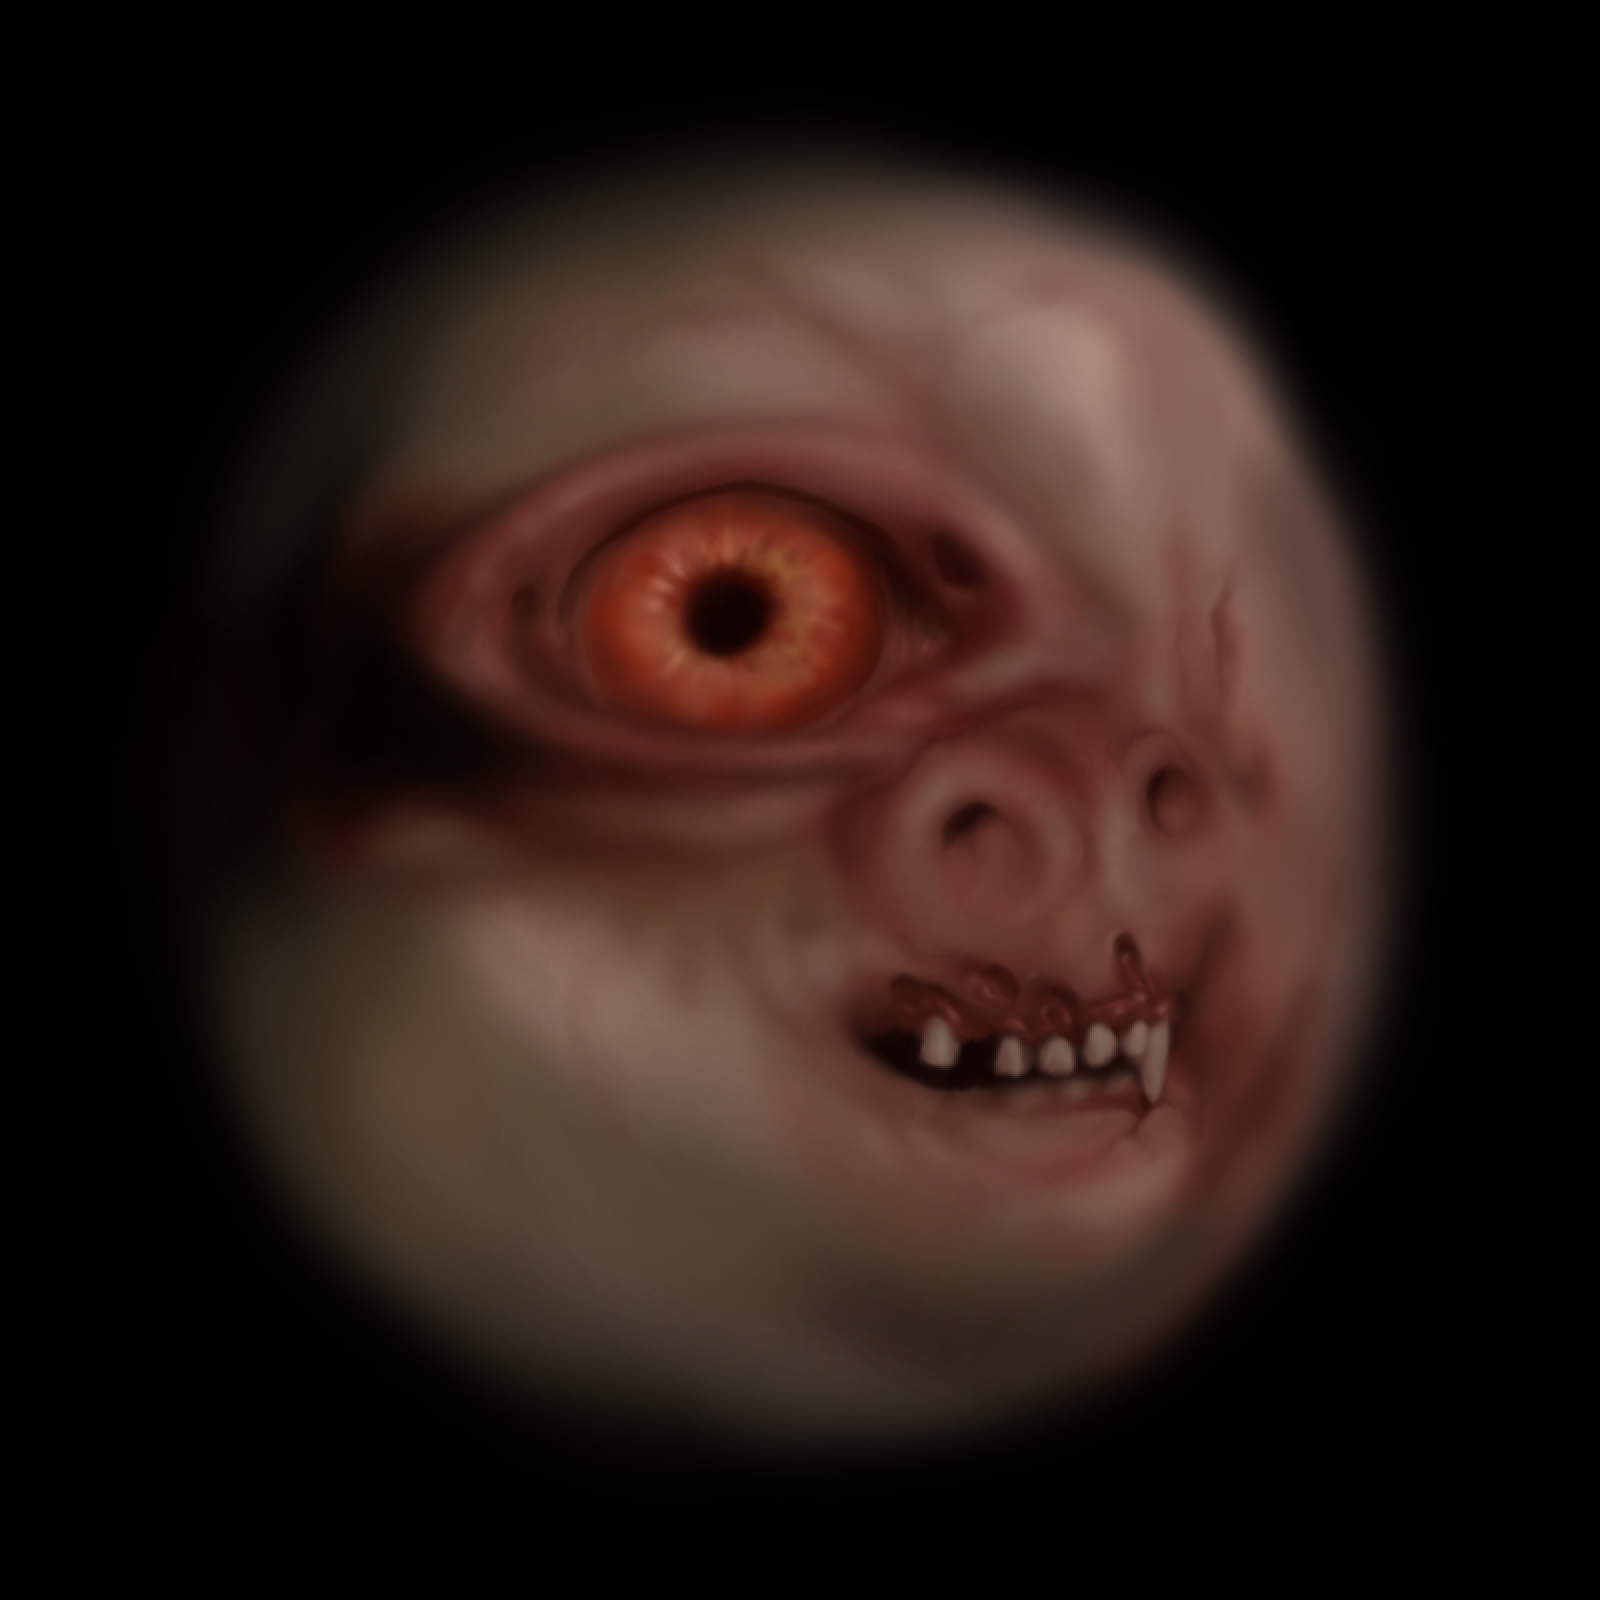 Digital painting on a dark background with a circle of flesh in the middle. The flesh has a strange face a menacing or silly smile and pig-like nose, and an orange eye that looks like the pupil is almost a donut, not part of the eyeball